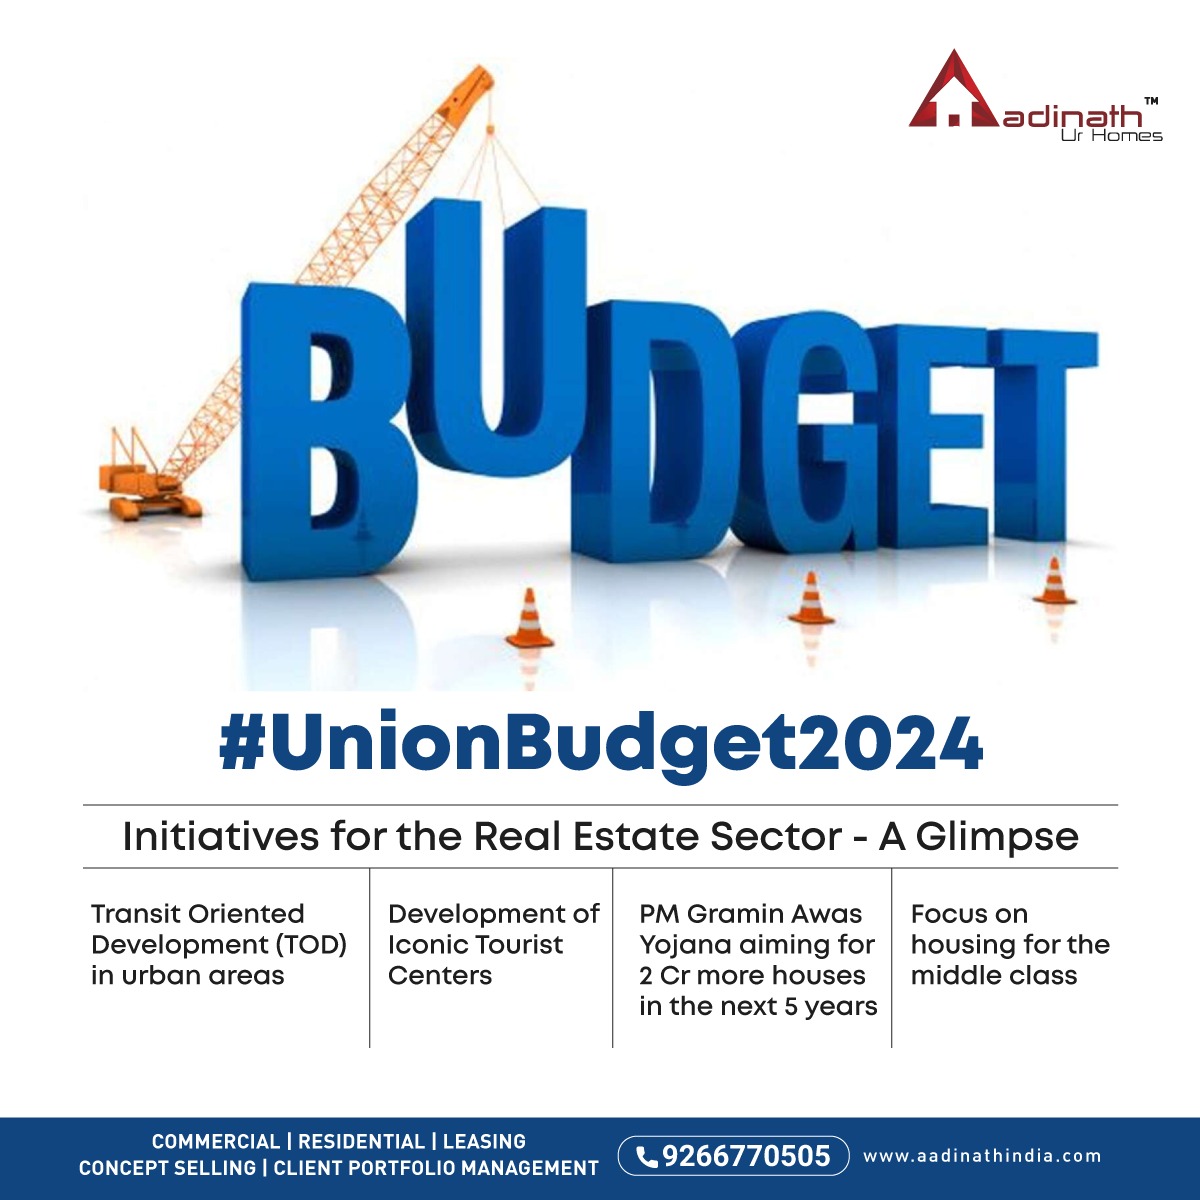 Though the real estate sector did not get much out of the Union Budget 2024, here are a few key takeaways for the industry. #Budget2024RealEstate #RealEstateOutlook #PropertyInvestment #ConstructionIndustry #PolicyChanges  #AadinathIndia #RetailSpaces #AadinathUrHomes